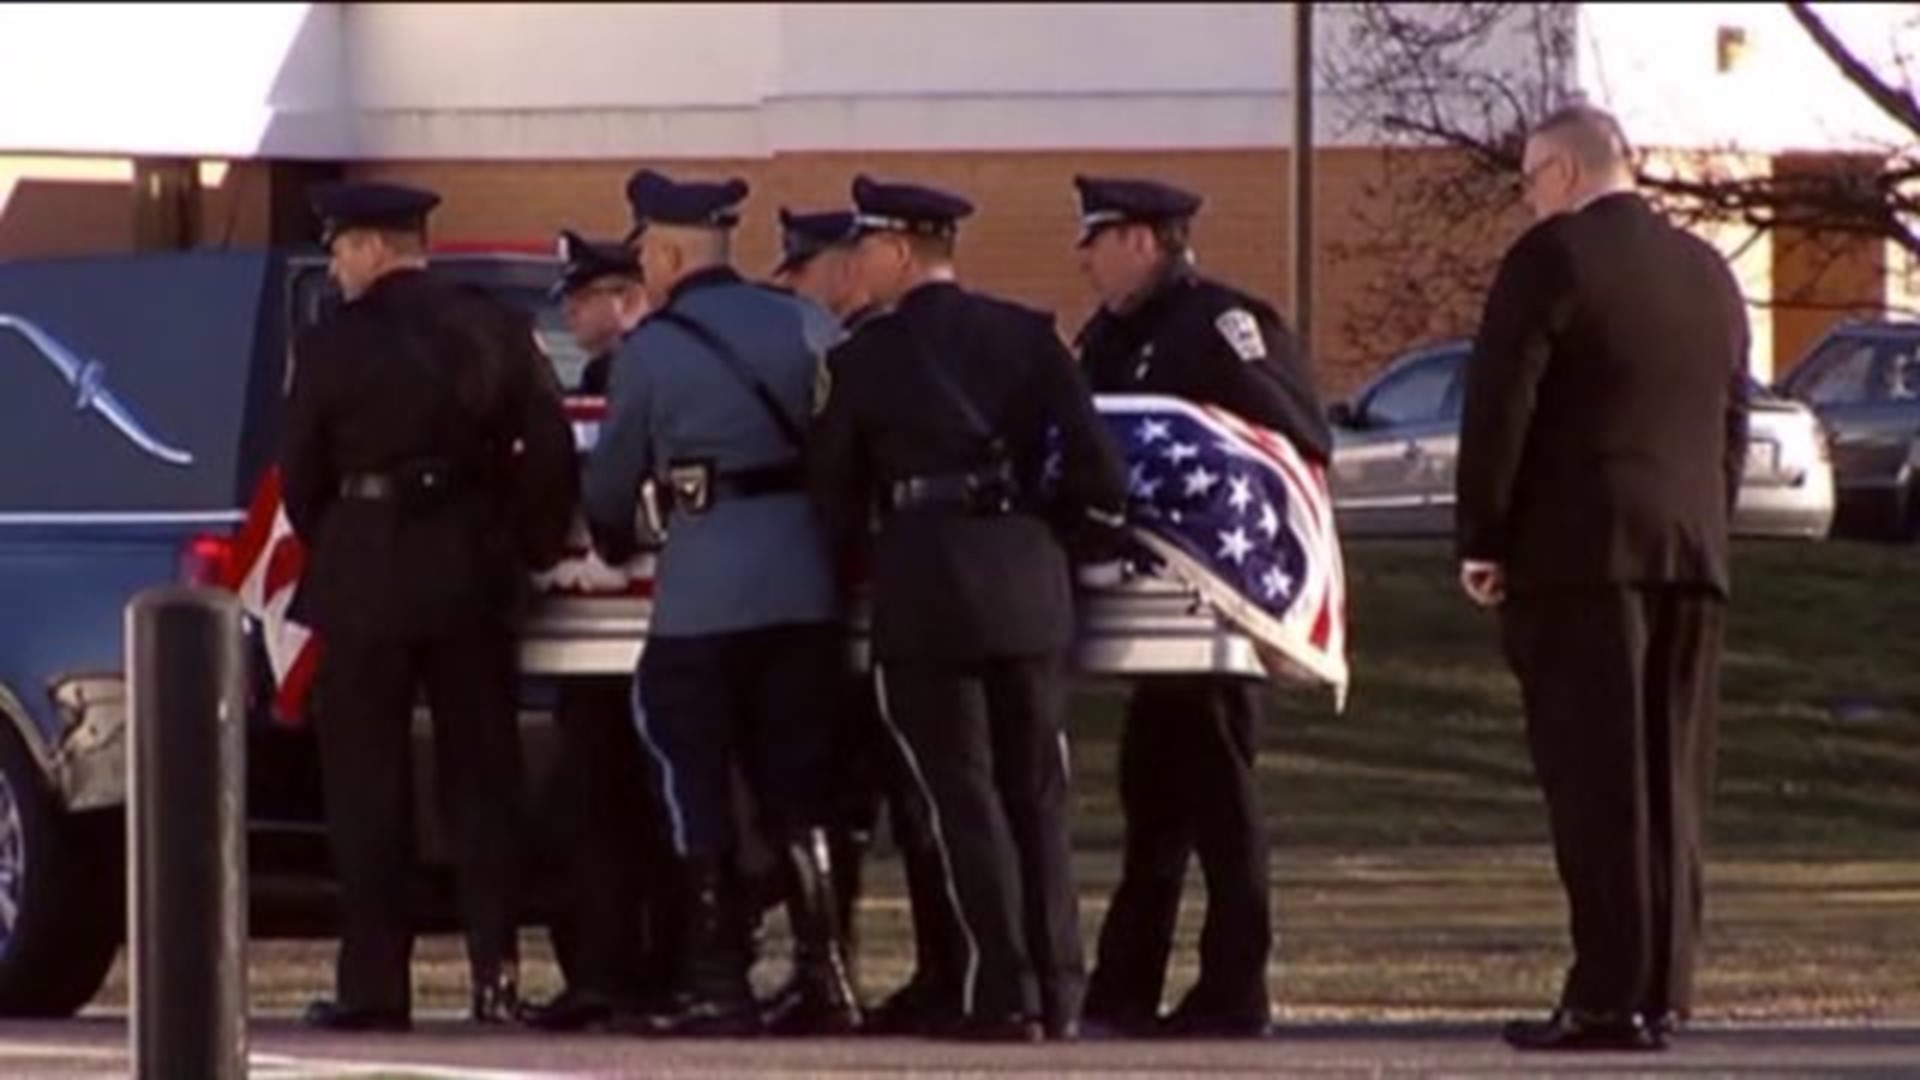 Officers honor one of their own